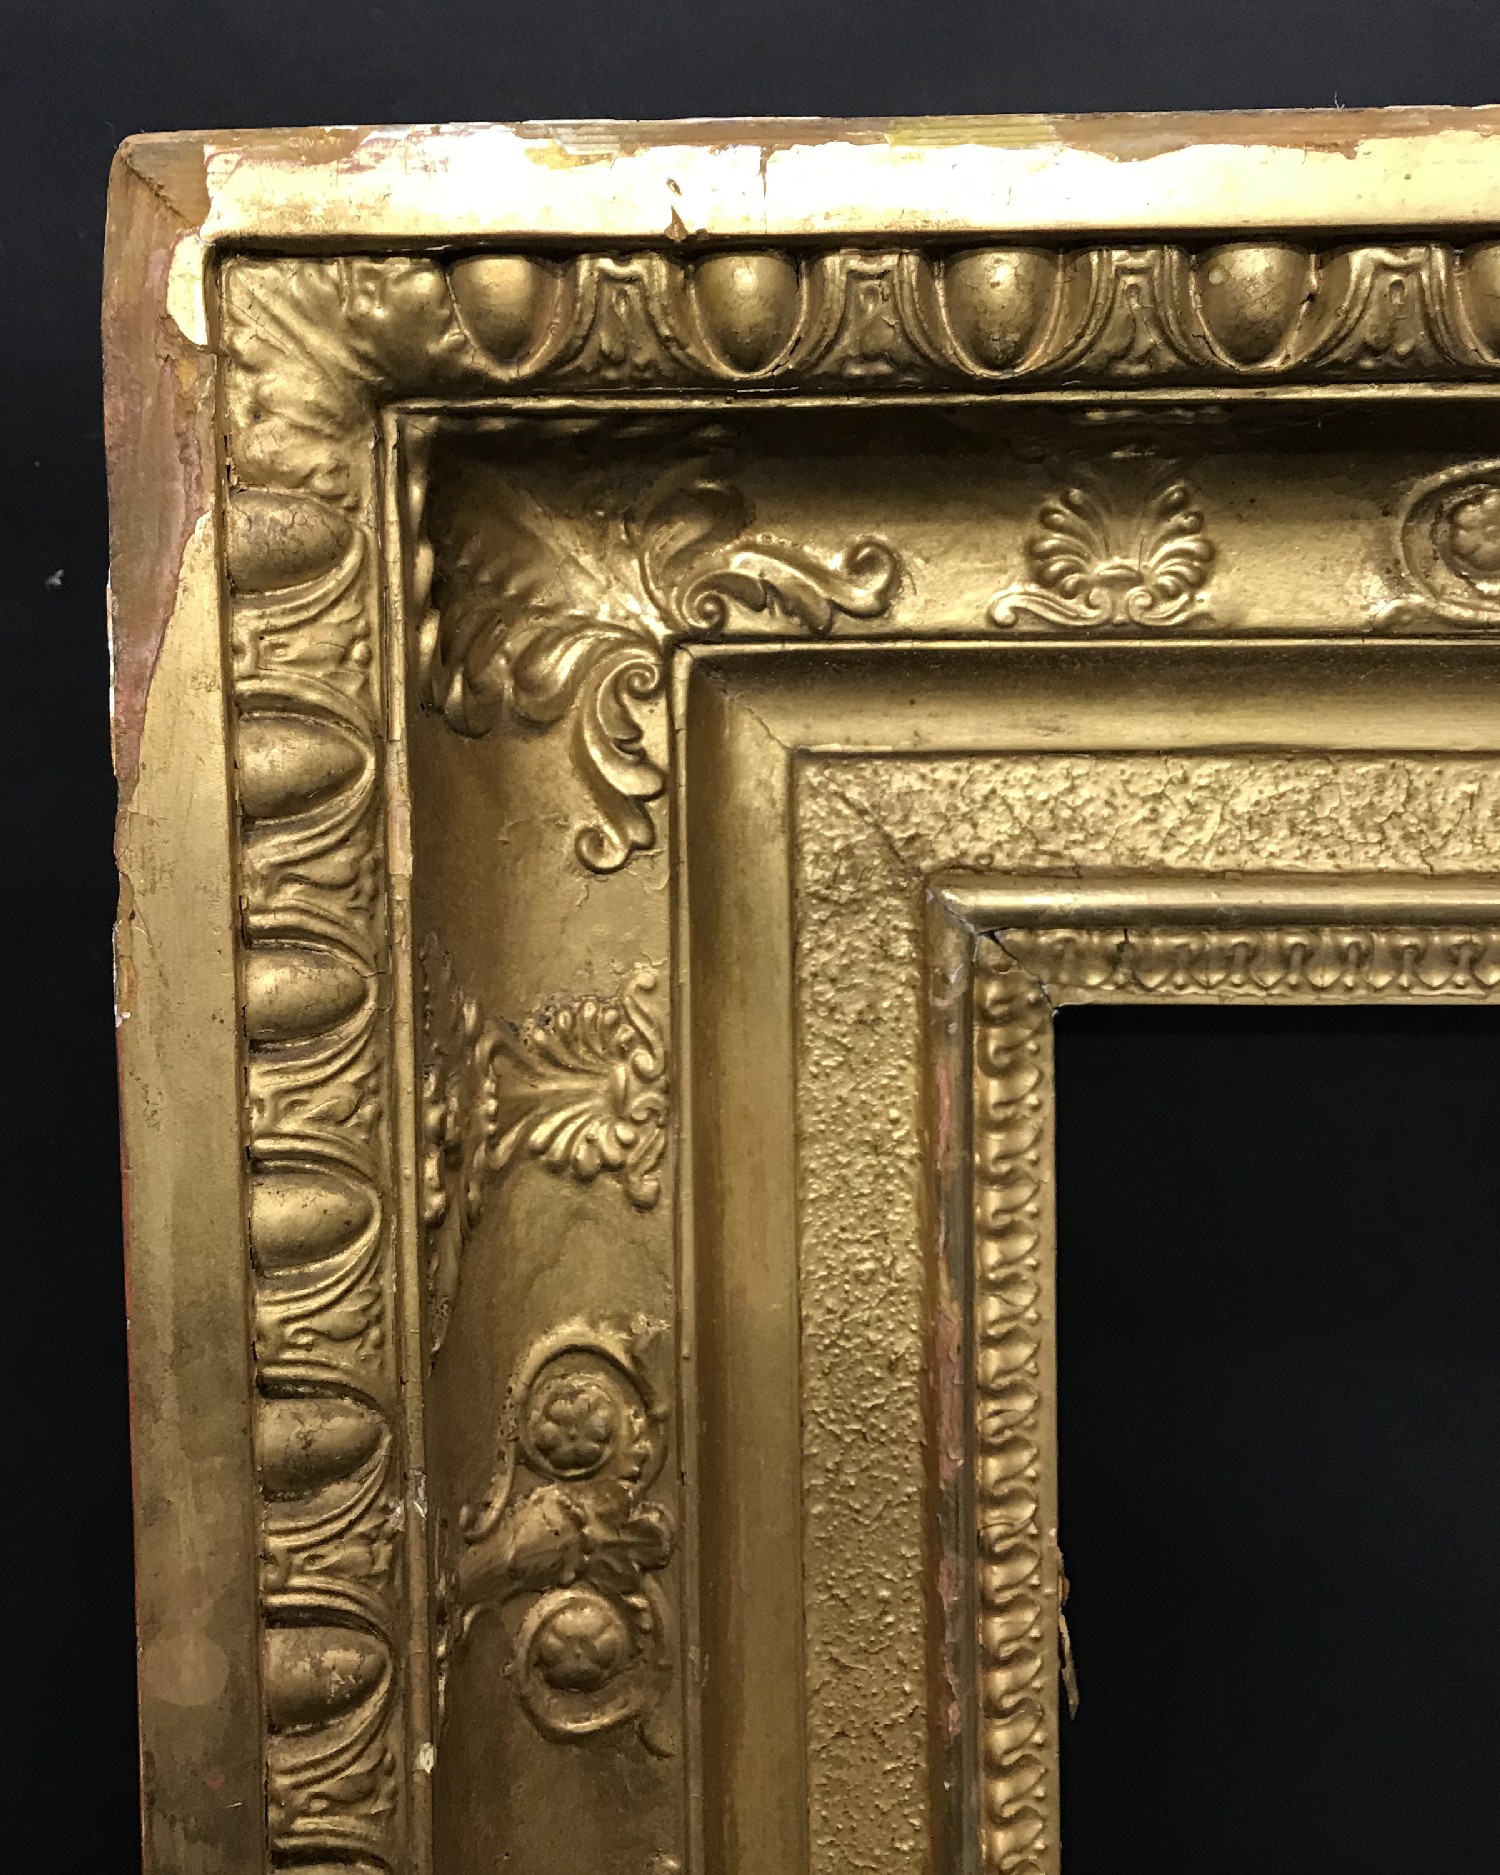 19th Century French School. An Empire Gilt Composition Frame, 26" x 22" (rebate).